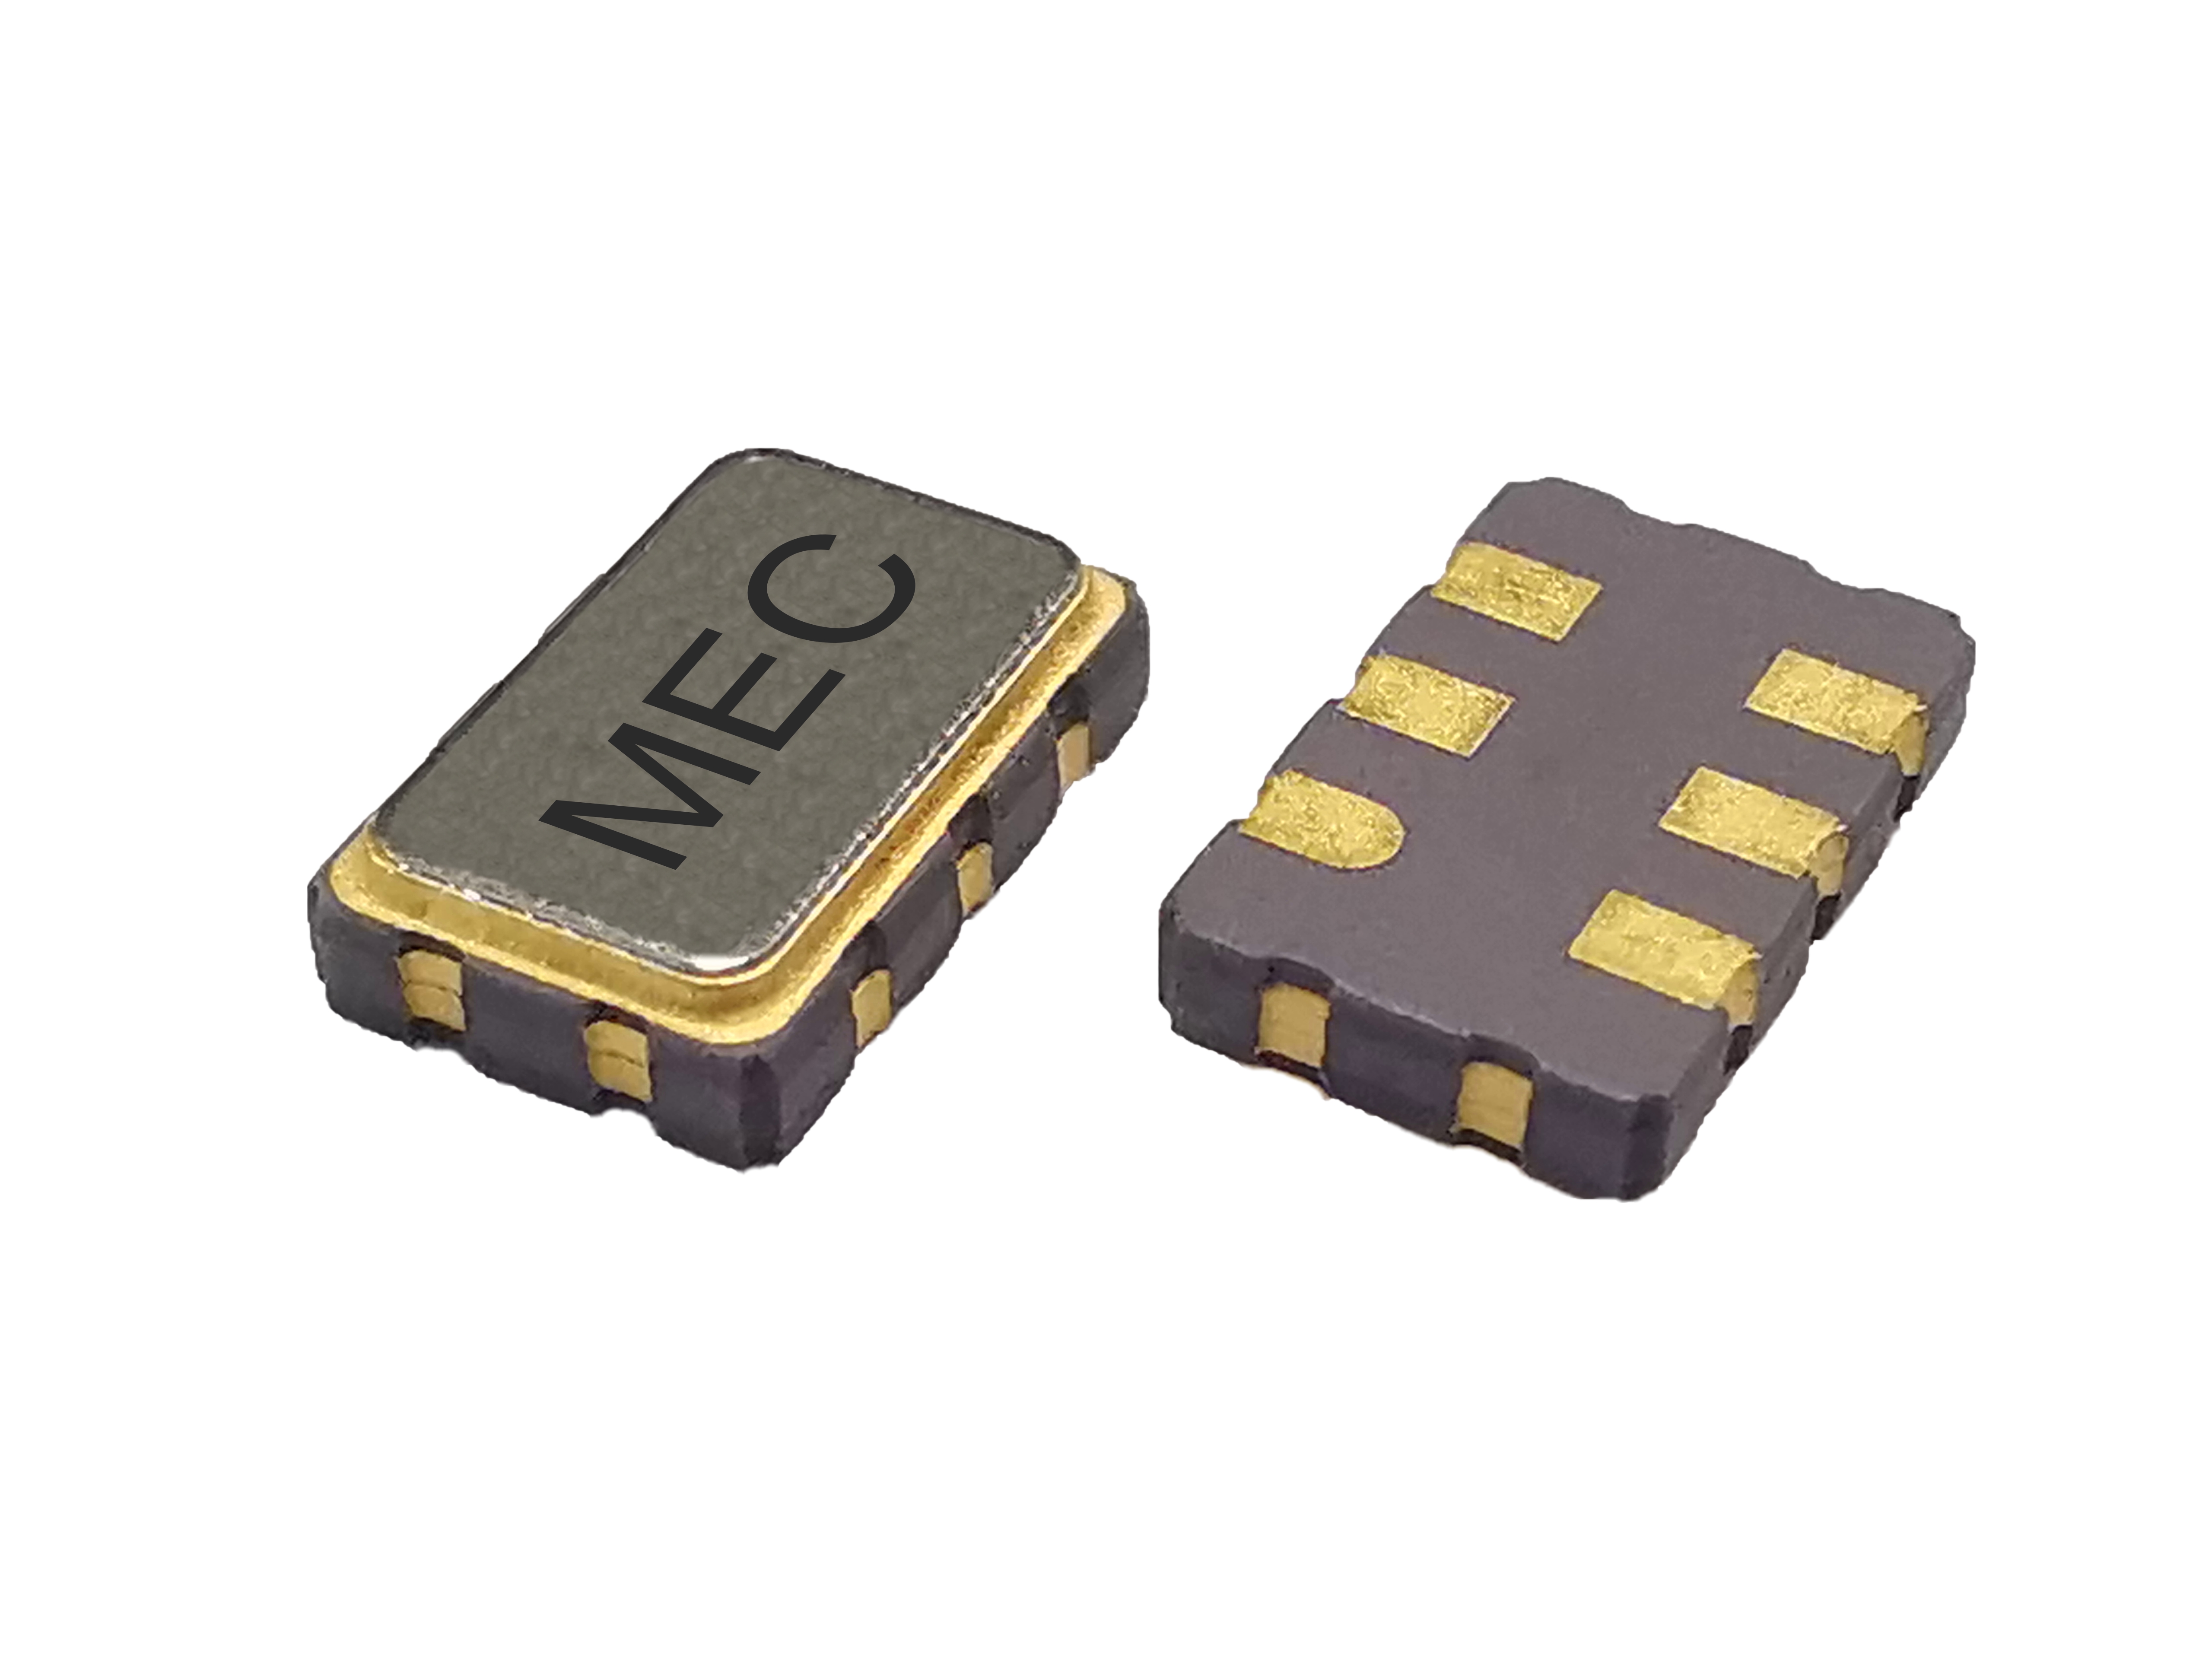 HPQF536 5032 2.5V Quick-Turn Programmable Differential LVPECL SMD Crystal Oscillator